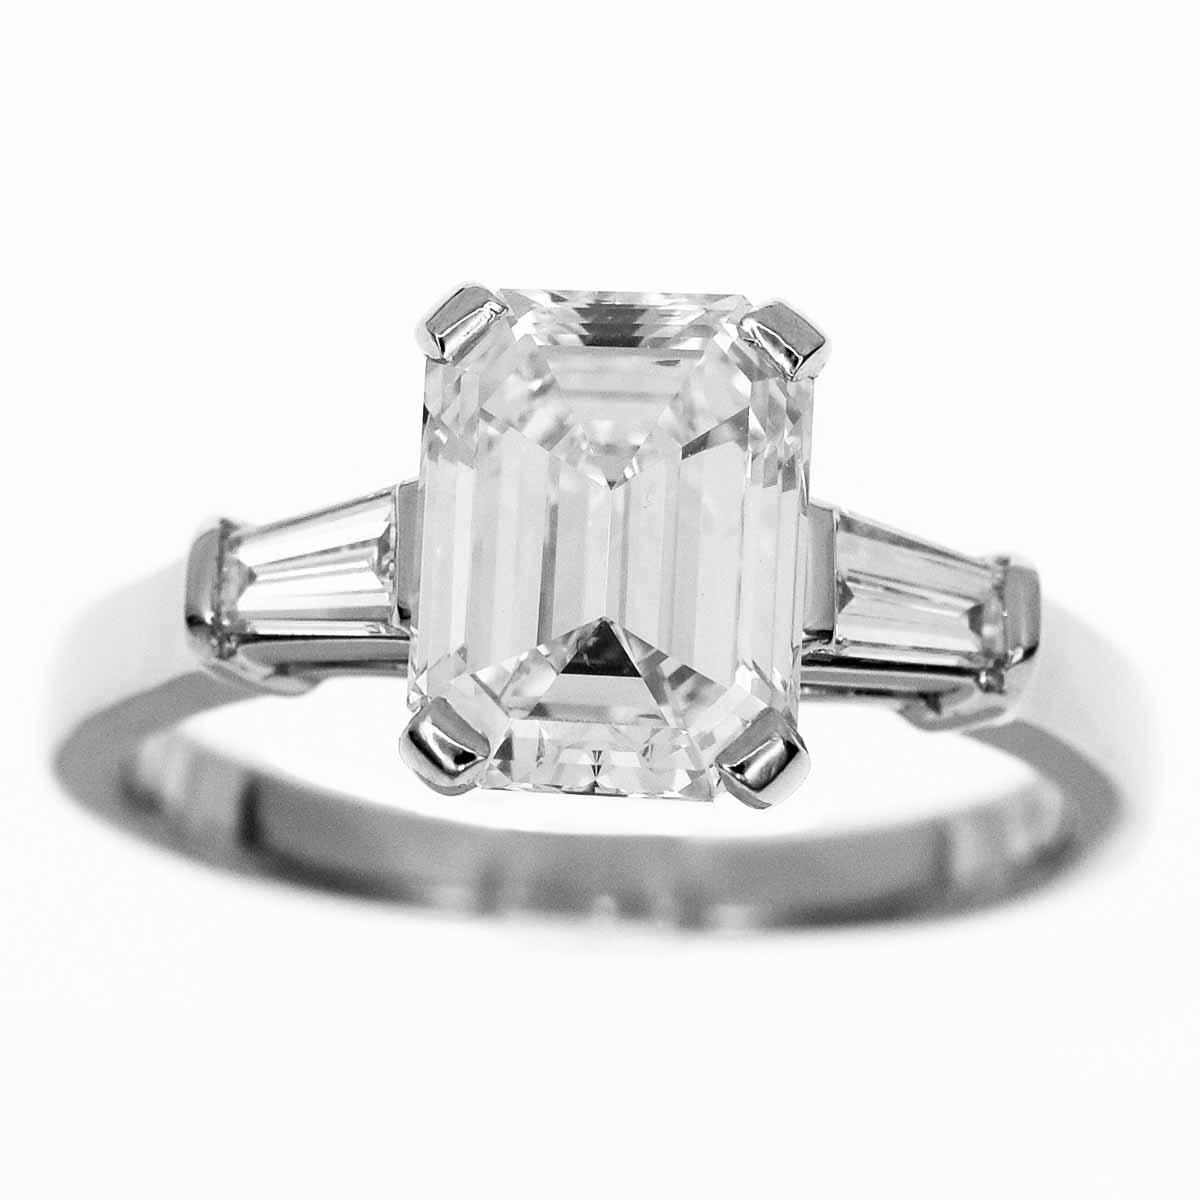 Brand:BVLGARI
Name:Griffe Ring
Ref.:331649
Material:1P diamond (1.61ct E-VS1), side diamond, PT950 platinum
Weight:4.1g（Approx)
Ring size:British & Australian:H 1/2  /   US & Canada:4 1/4 /  French & Russian:47 /  German:15 /  Japanese: 7  /Swiss: